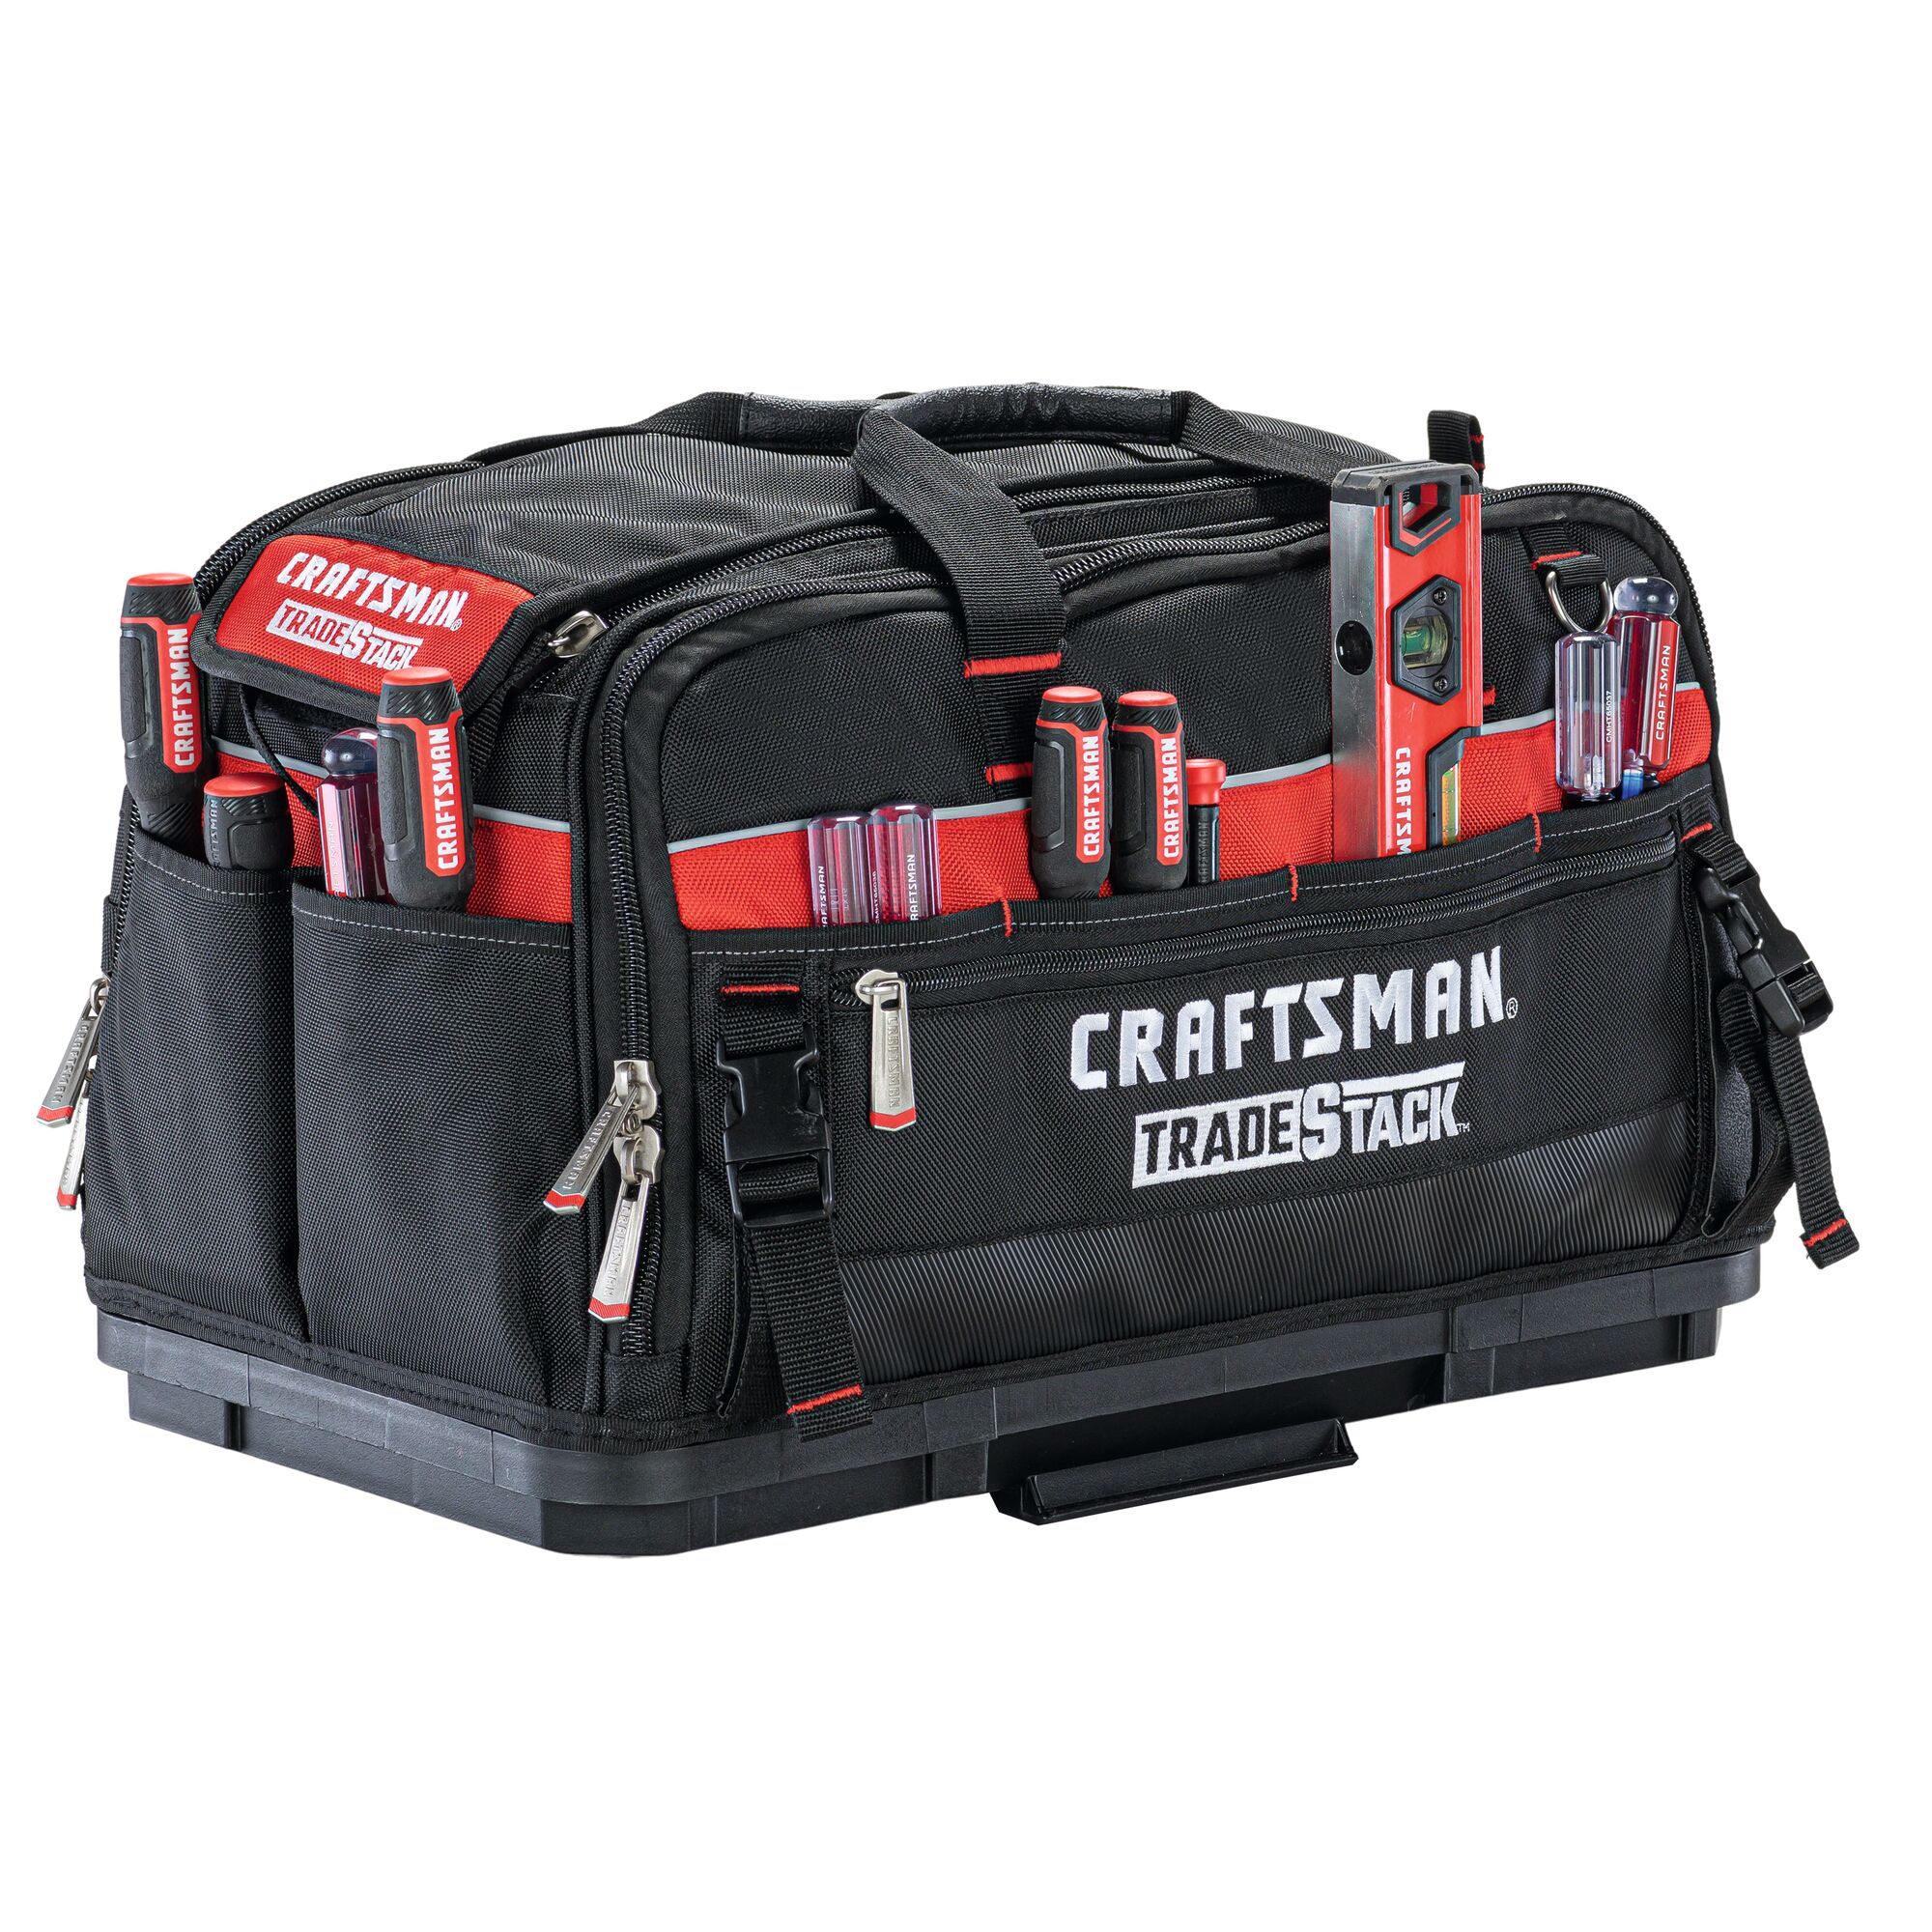 View of CRAFTSMAN Storage: Tradesystem highlighting product features